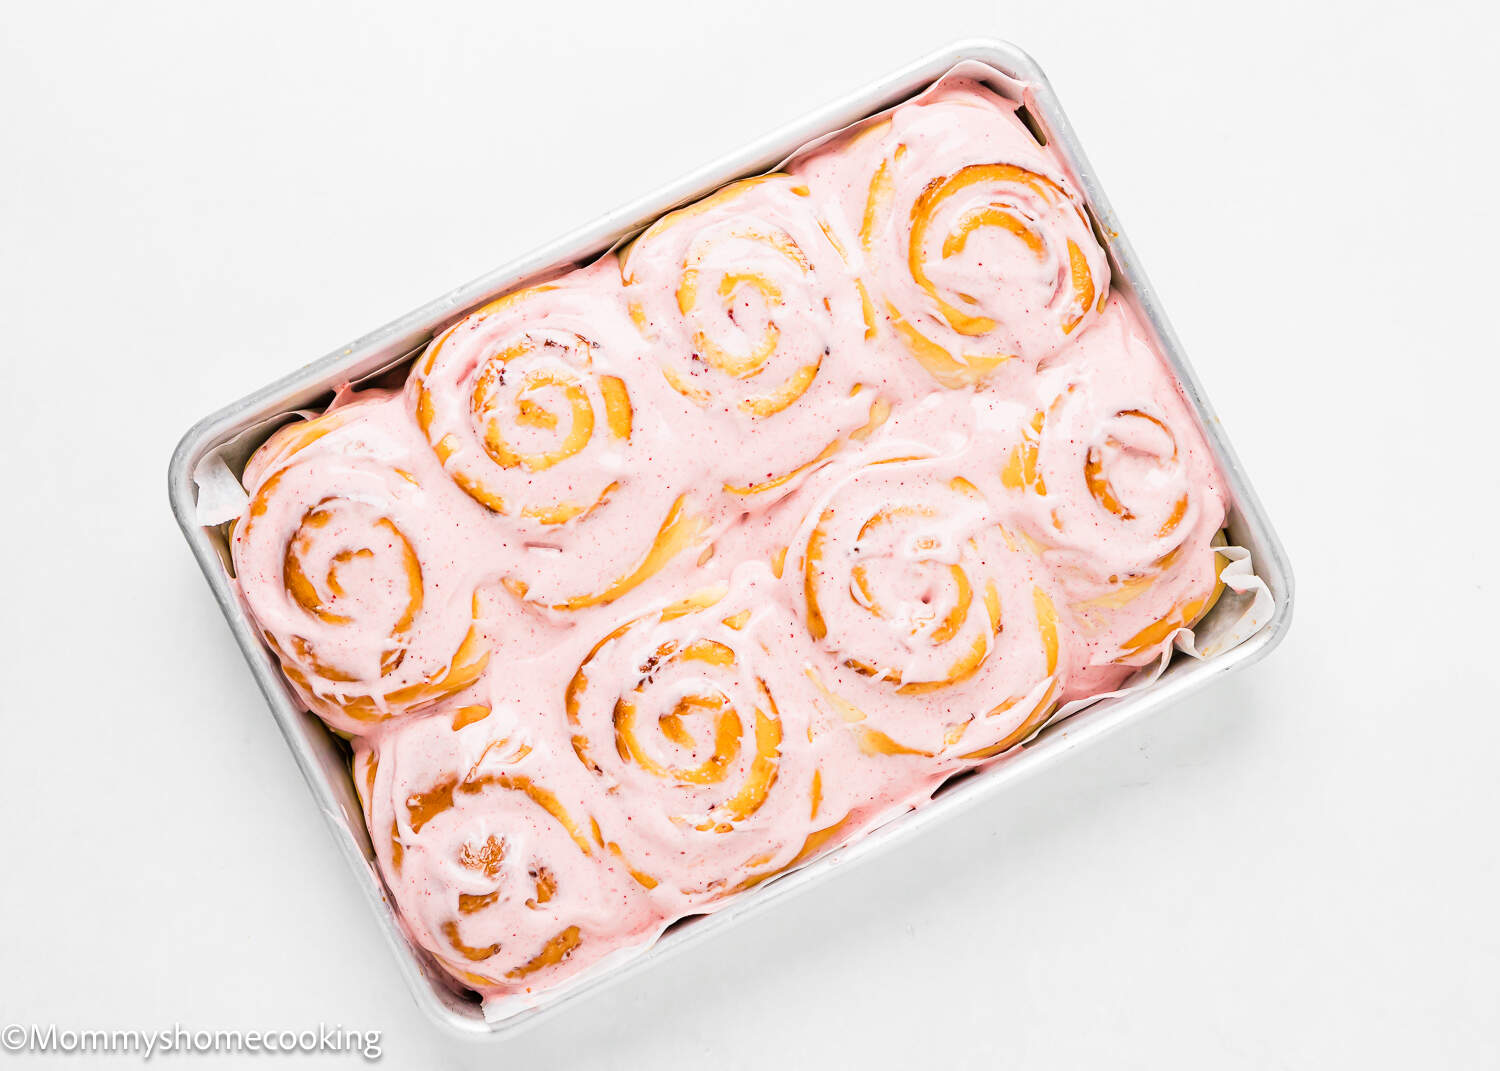 Strawberry Rolls with strawberry frosting in a baking tray.